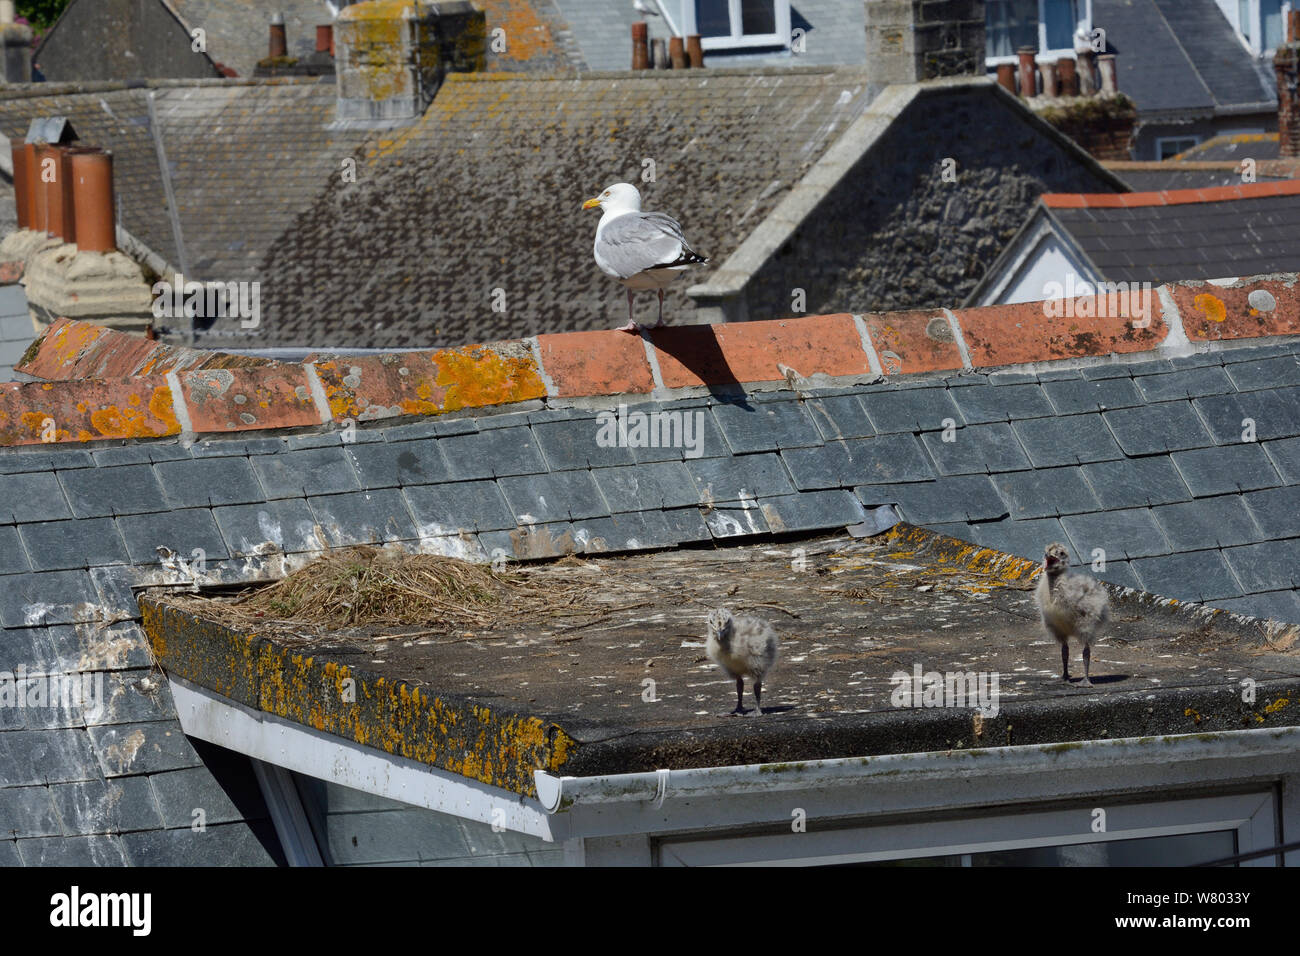 Two Herring gull chicks (Larus argentatus) walking on a rooftop with a parent perched nearby, St.Ives, Cornwall, UK, June. Stock Photo